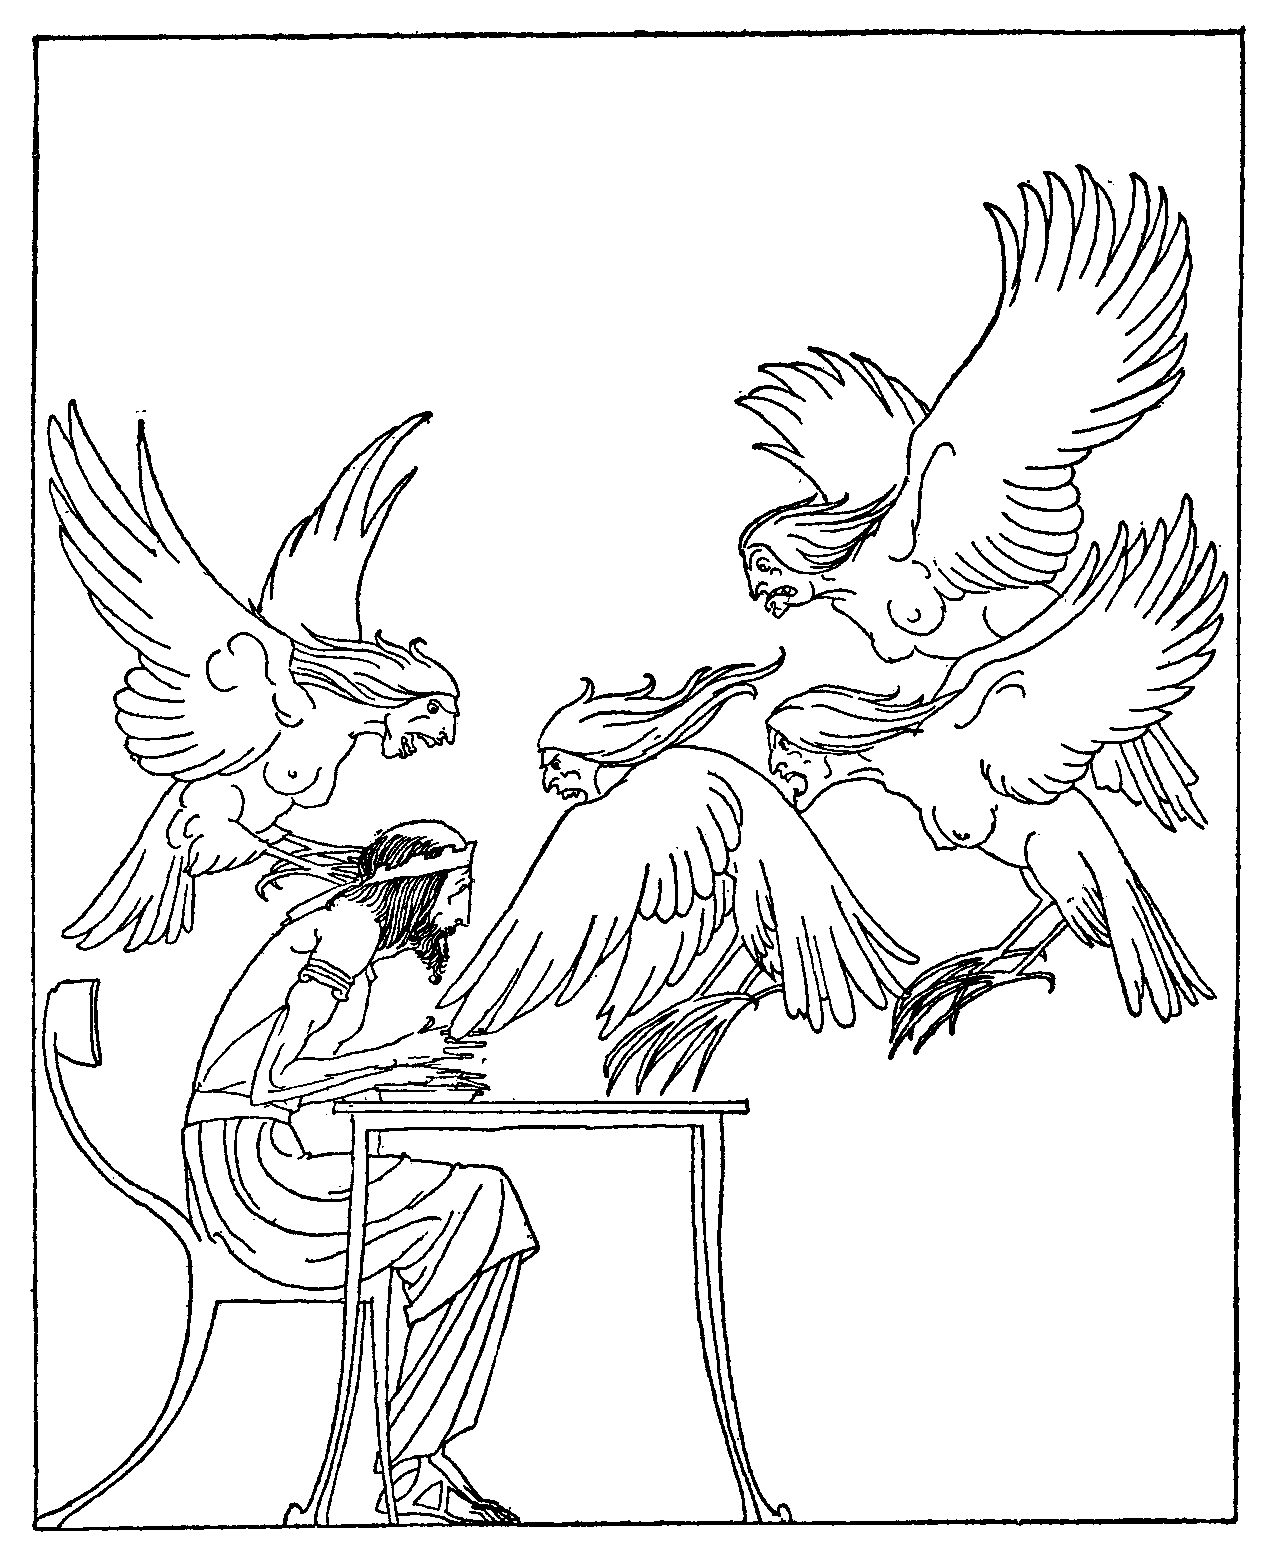 Phineus and the Harpies by Willy Pogany.gif